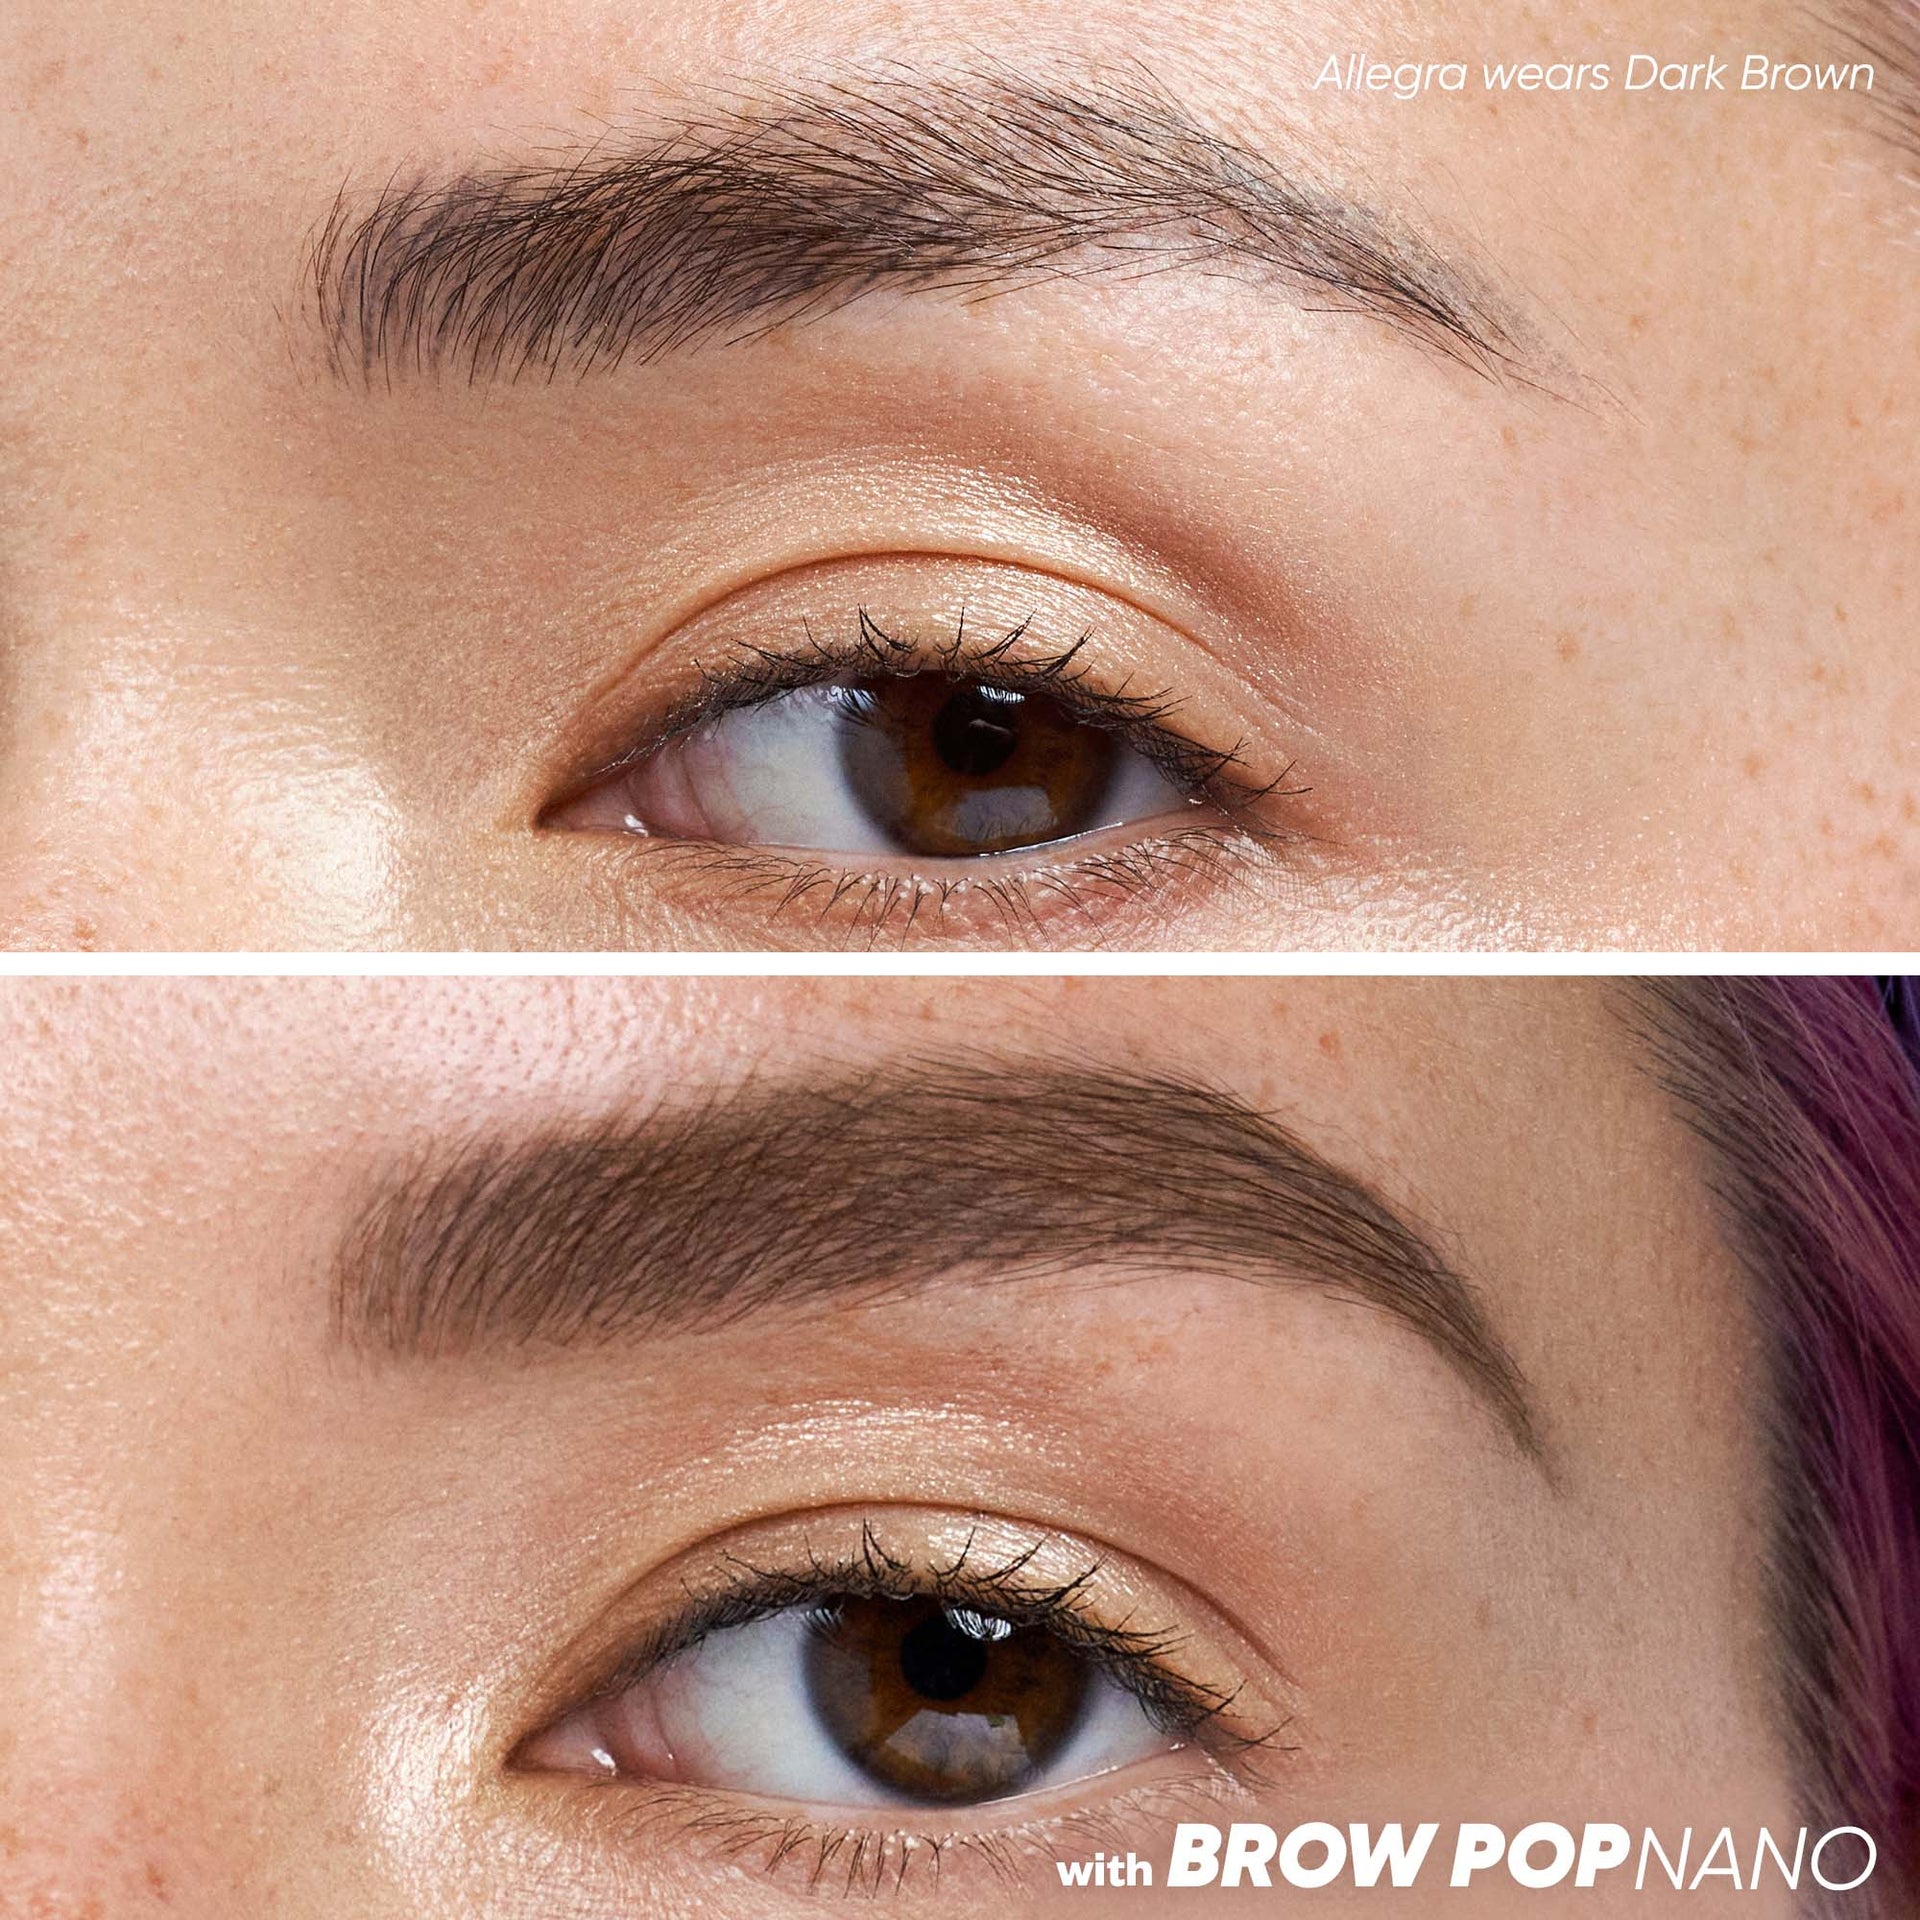 Close-up before and after comparison of Kosas Brow Pop Nano in the shade Dark Brown.